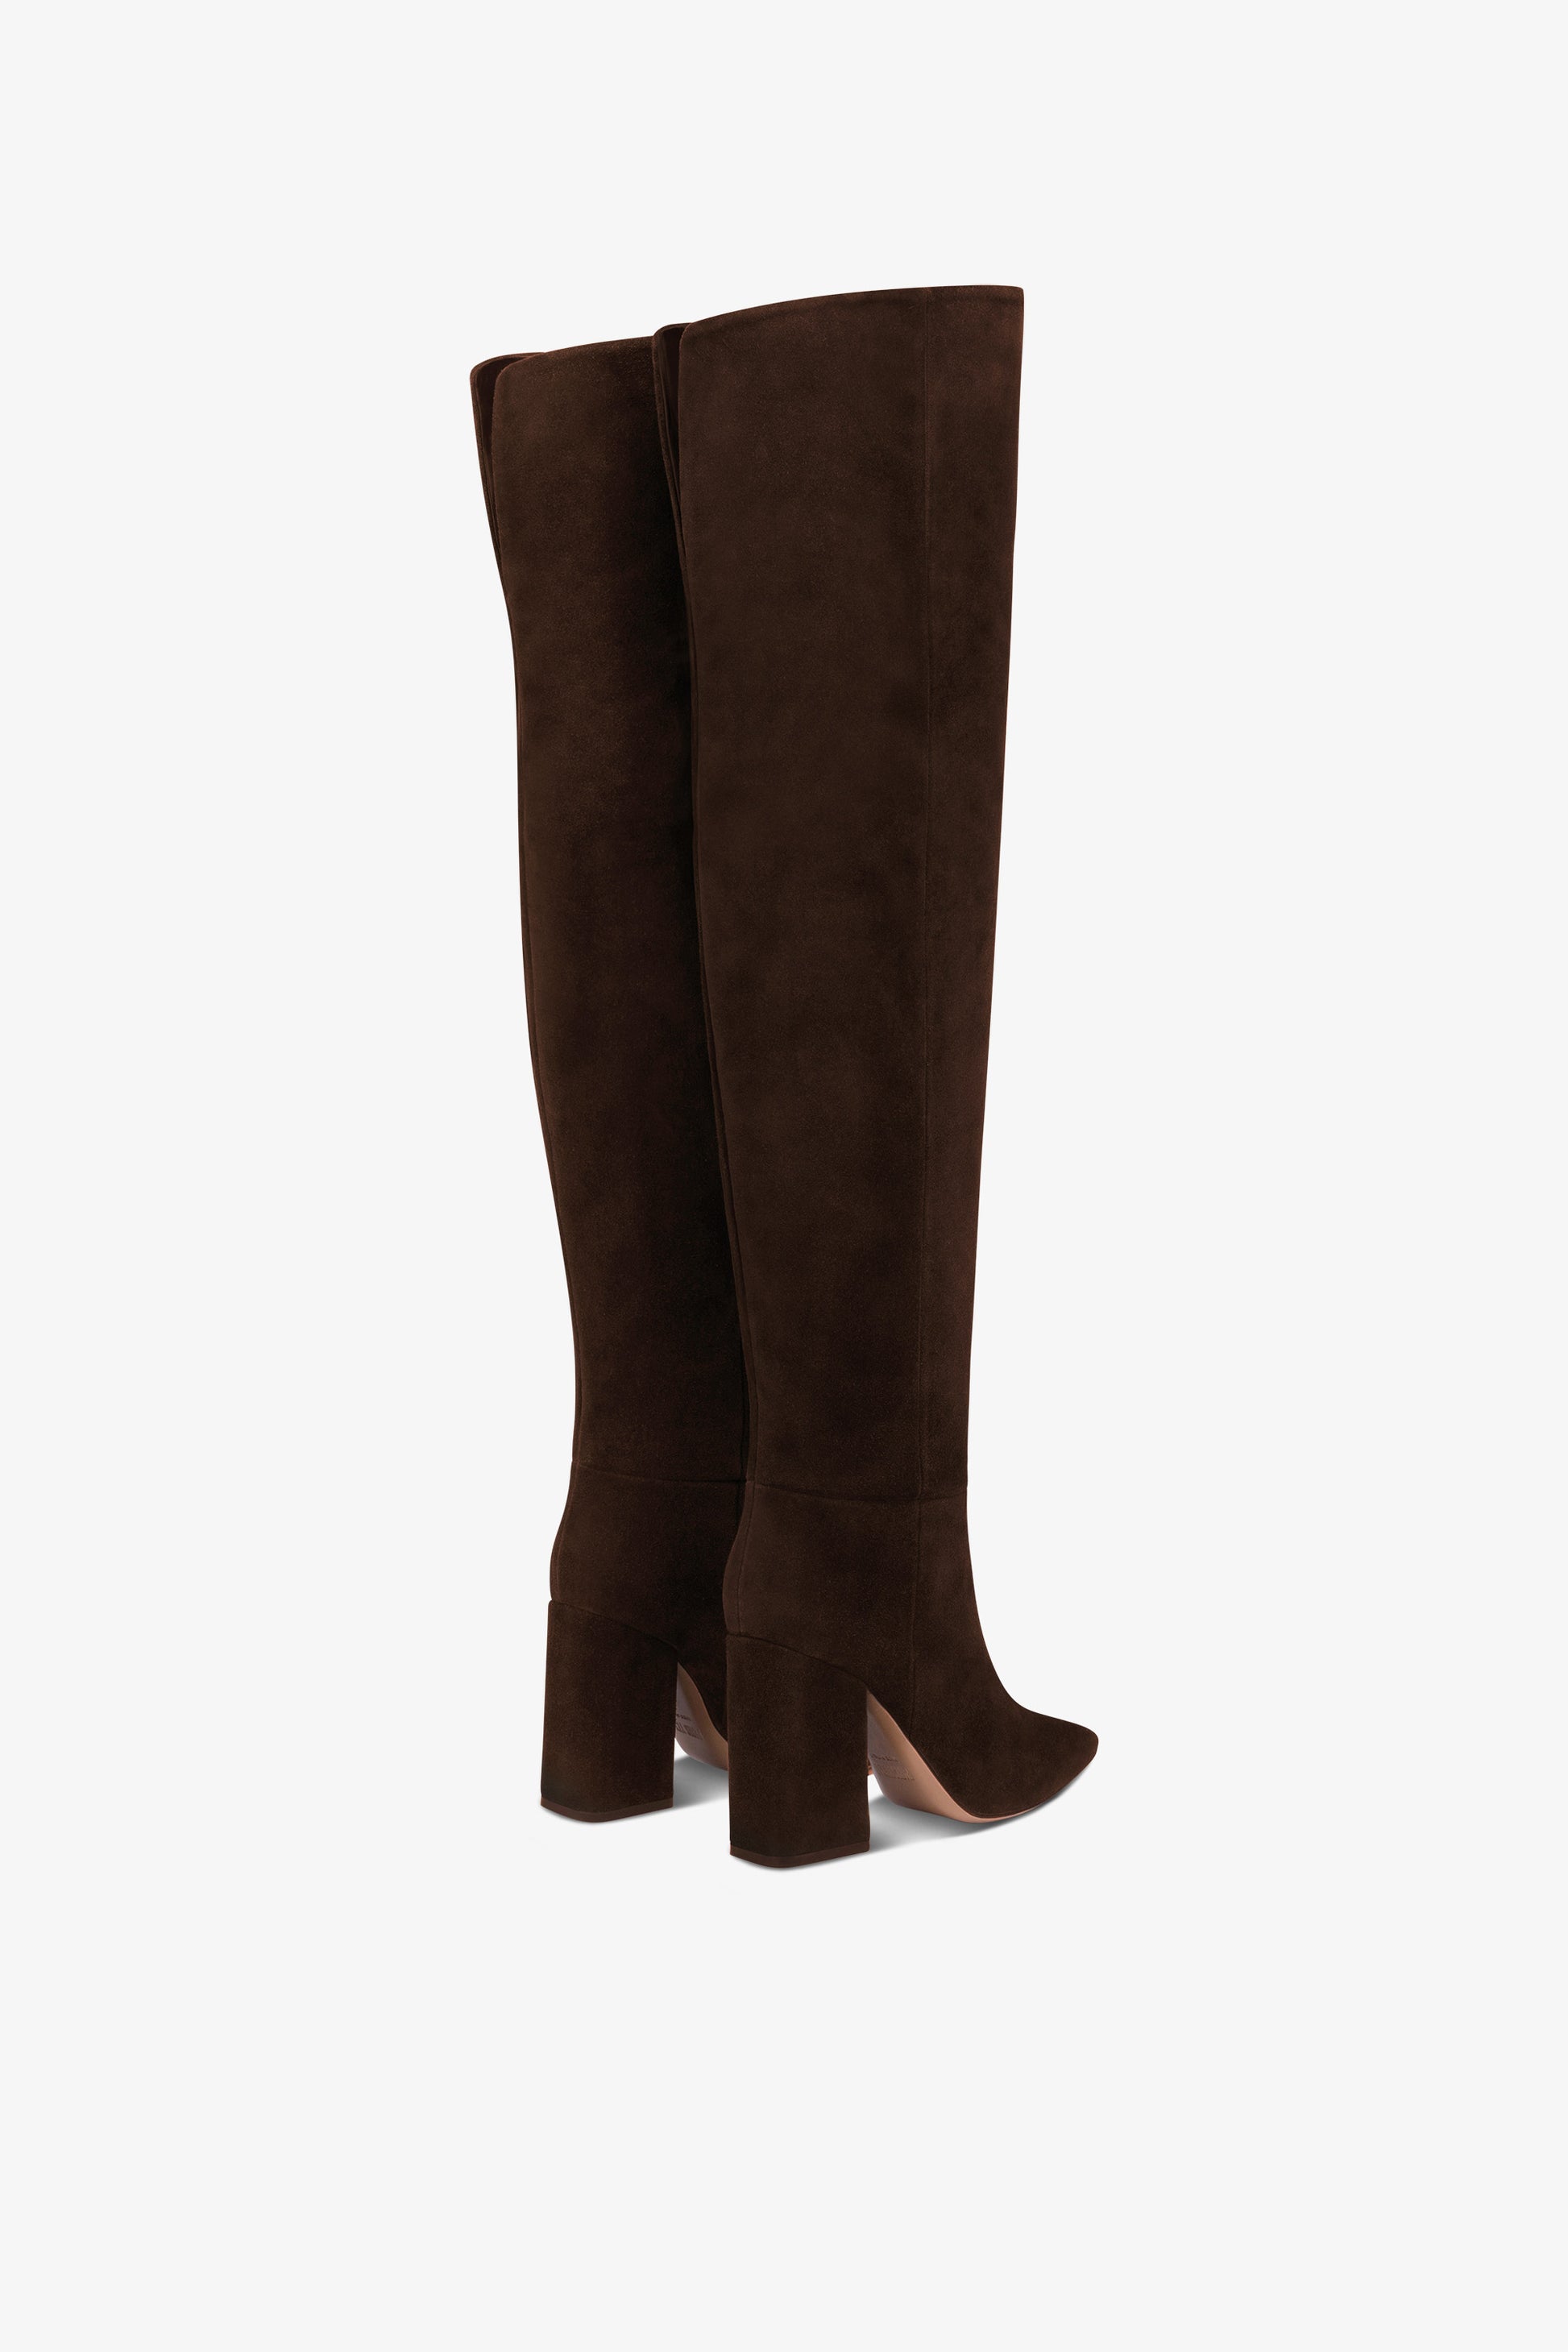 Over-the-knee, long pointed boots in soft pepper suede leather